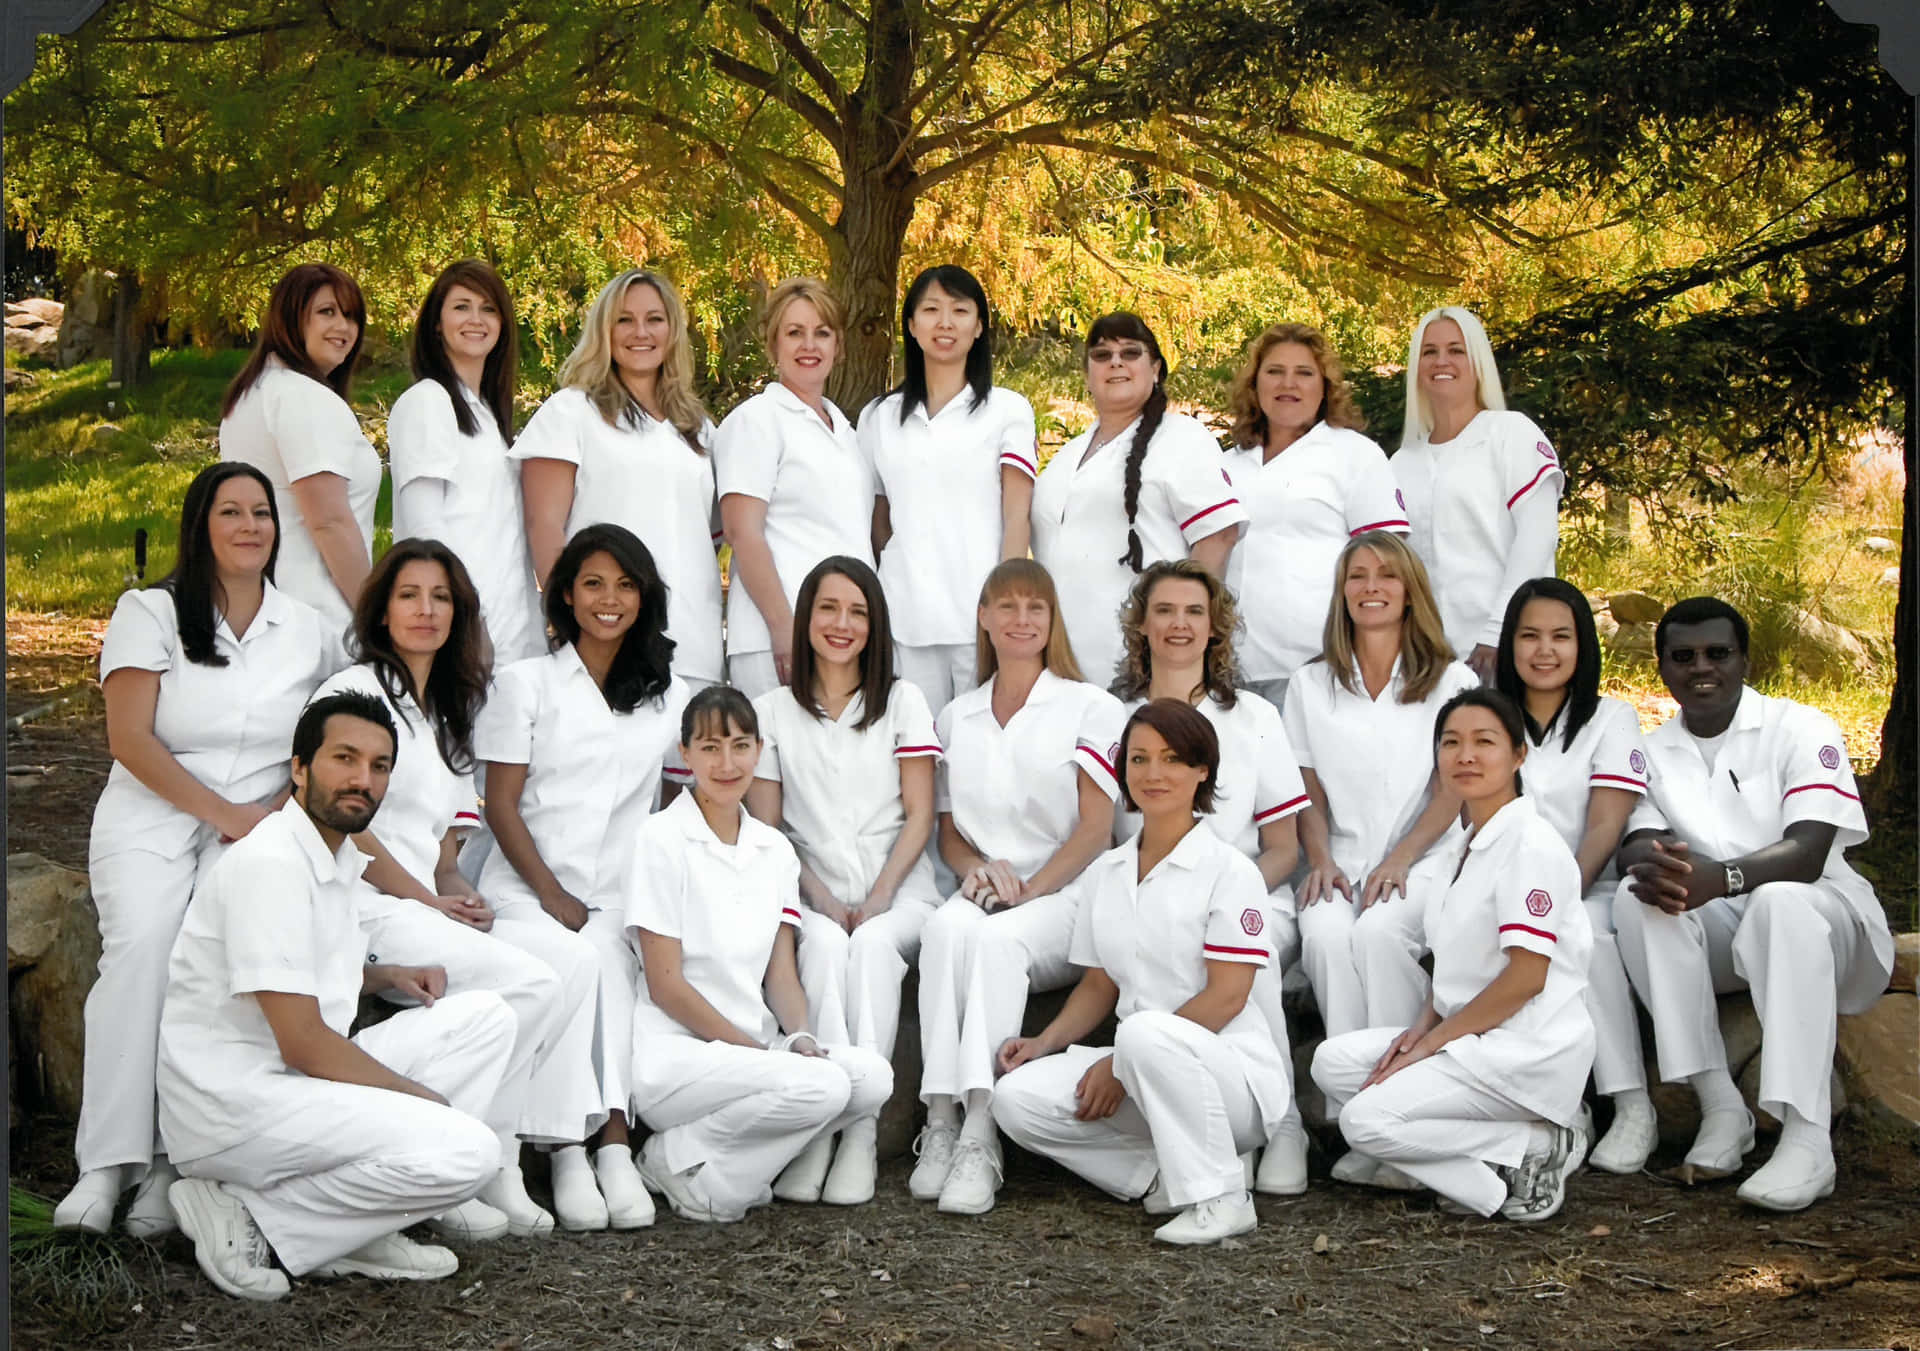 A Group Of Women In White Scrubs Posing For A Photo